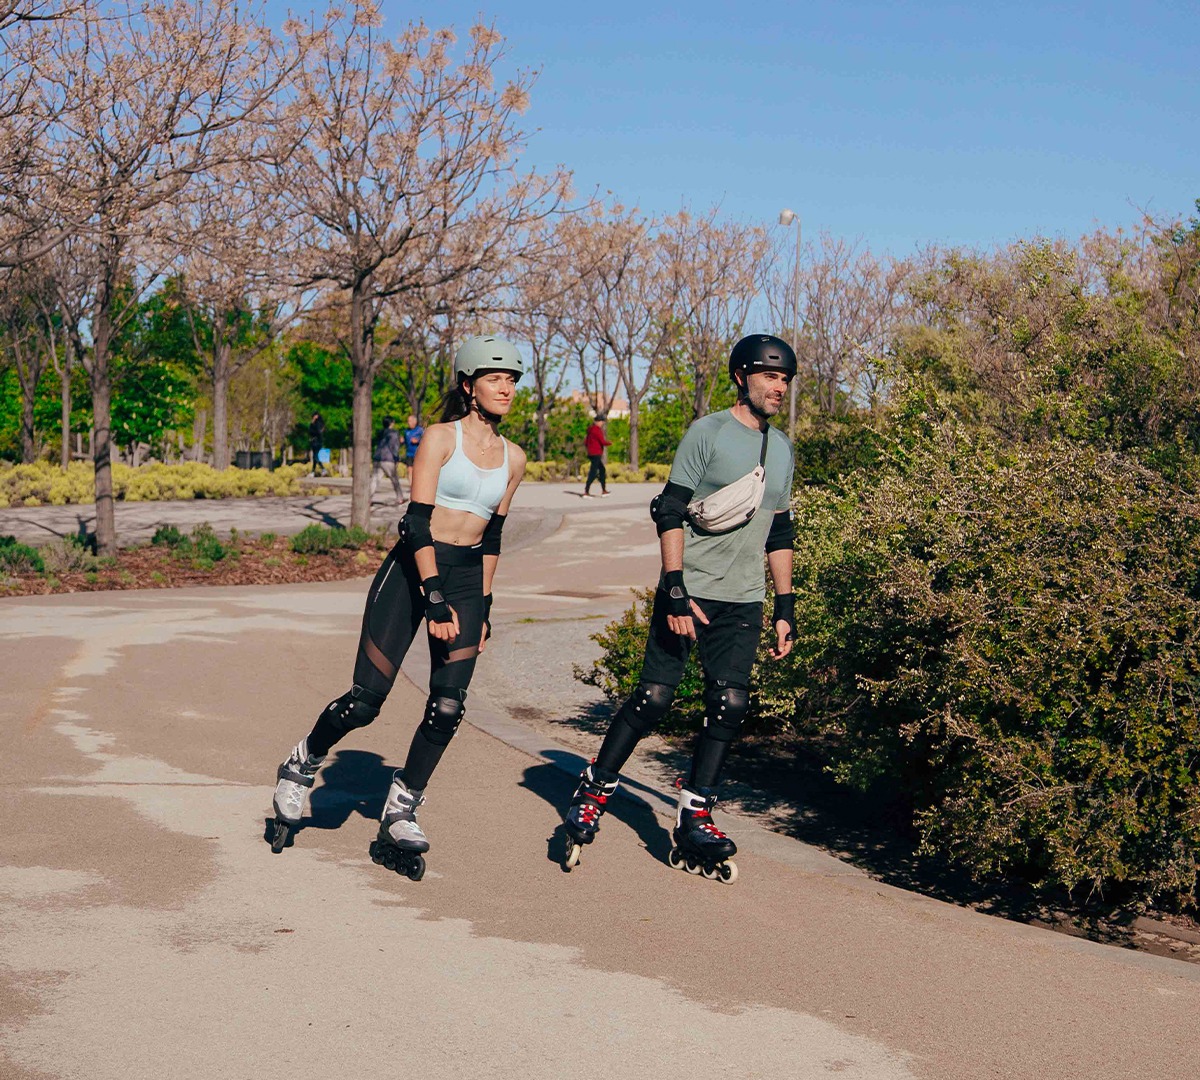 Skating-Top-Rated-Skates-and-Scooters-for-all-Ages-and-Skill-Levels-at-Decathlon